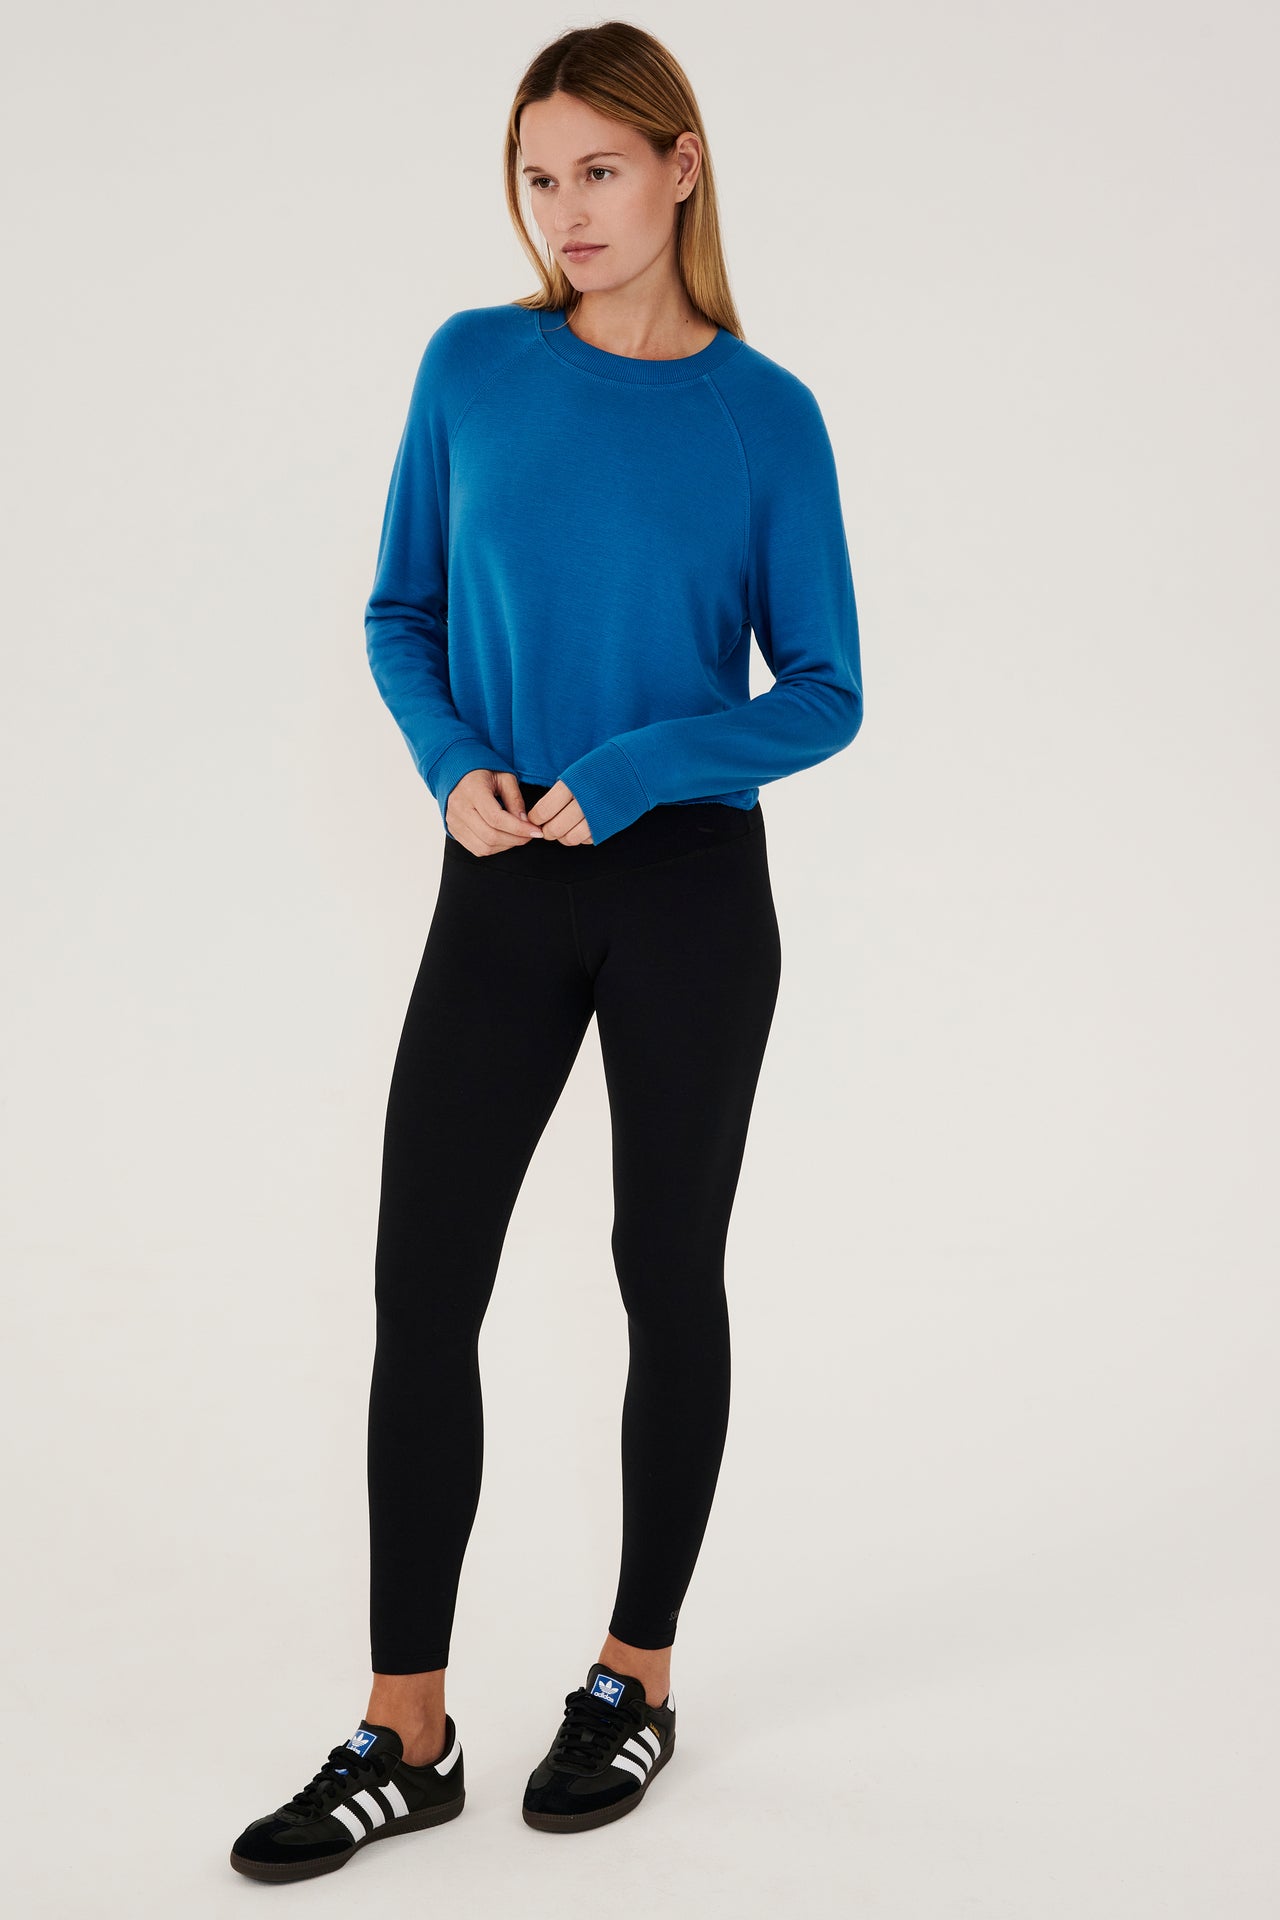 Full front view of woman with dark blonde hair, wearing cropped  bright blue sweatshirt with black leggings and black shoes with white stripes